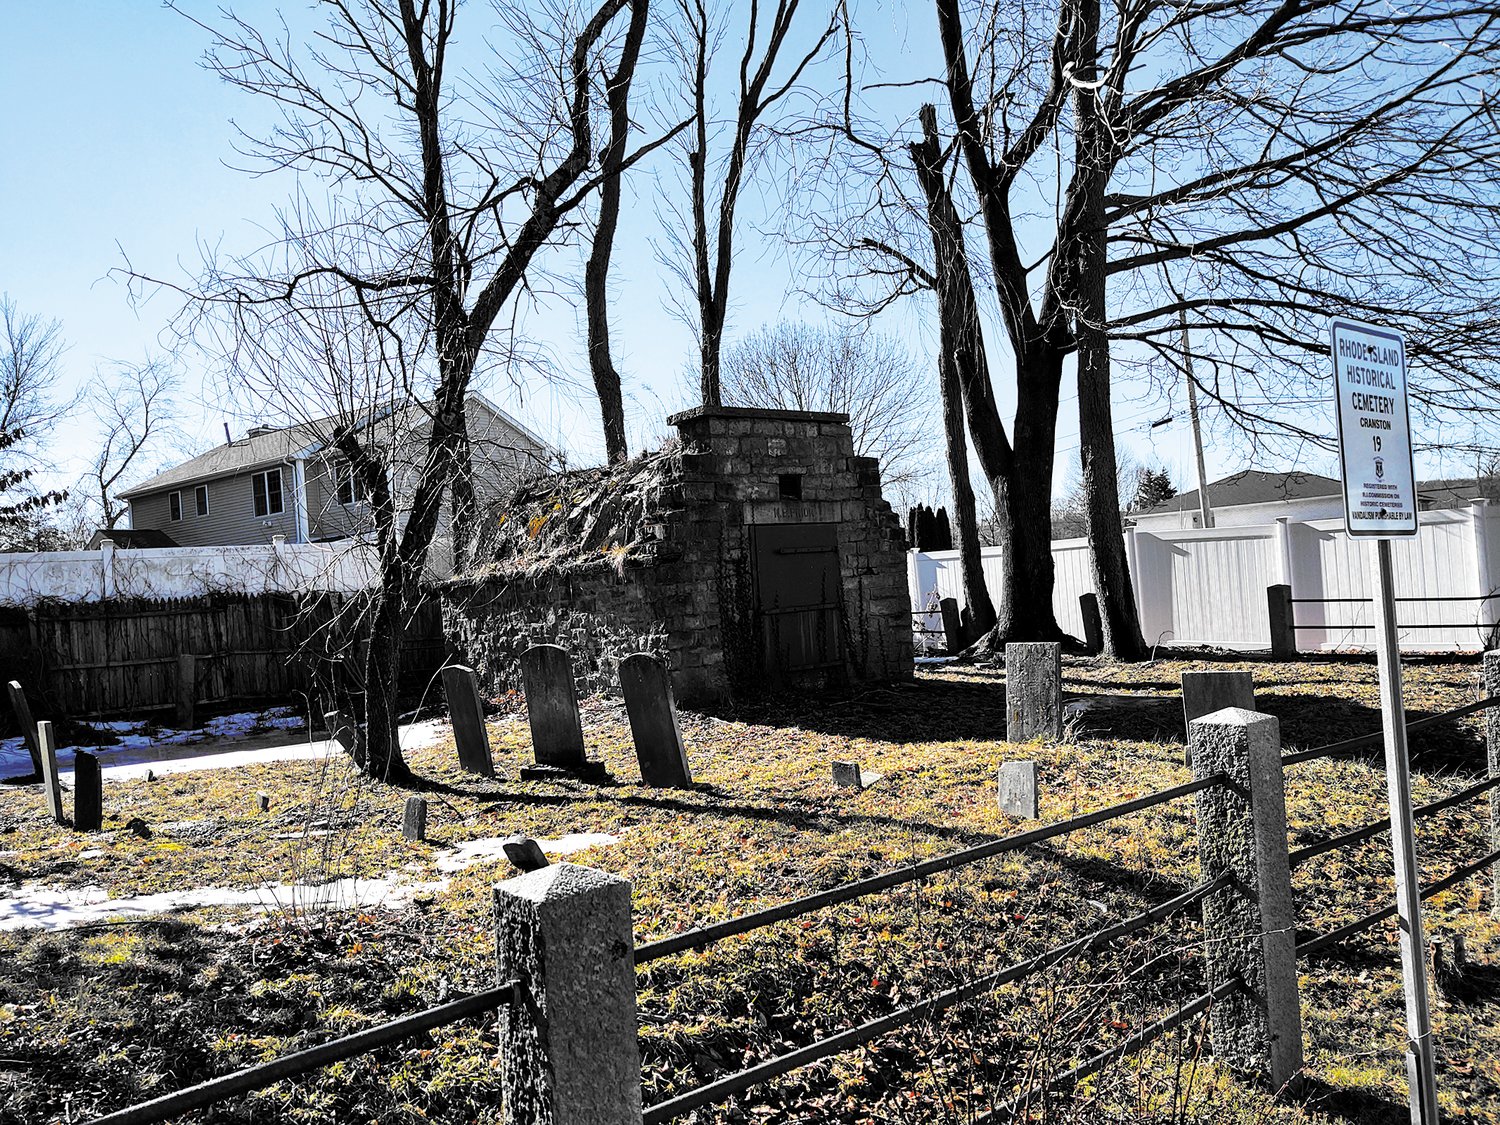 The Nicholas Sheldon Lot, Historic Cemetery Number 19 on Scituate Avenue in Cranston.